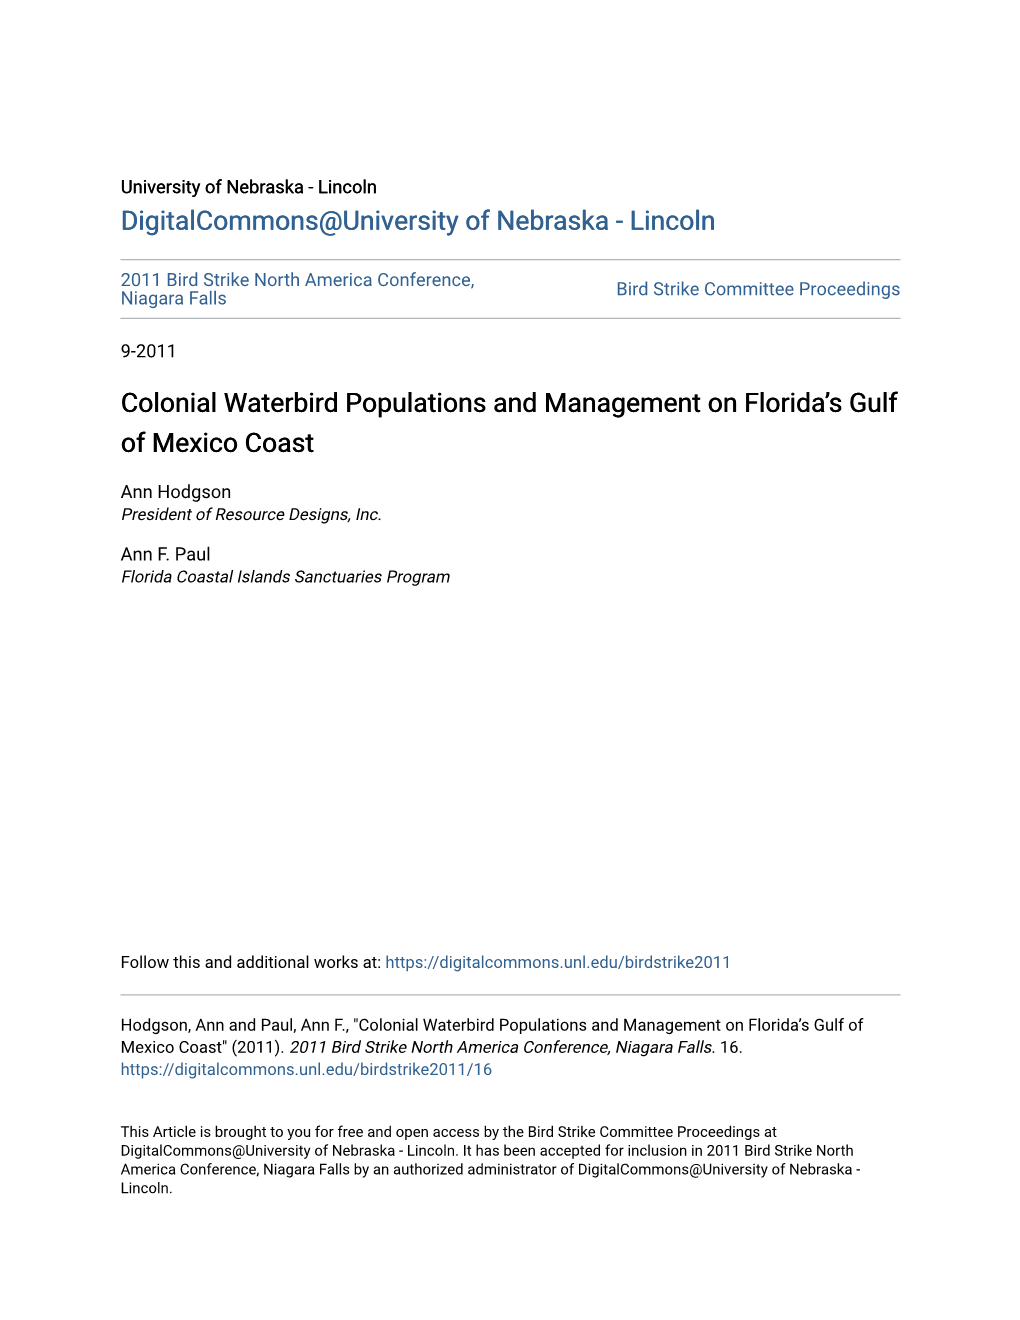 Colonial Waterbird Populations and Management on Florida's Gulf of Mexico Coast